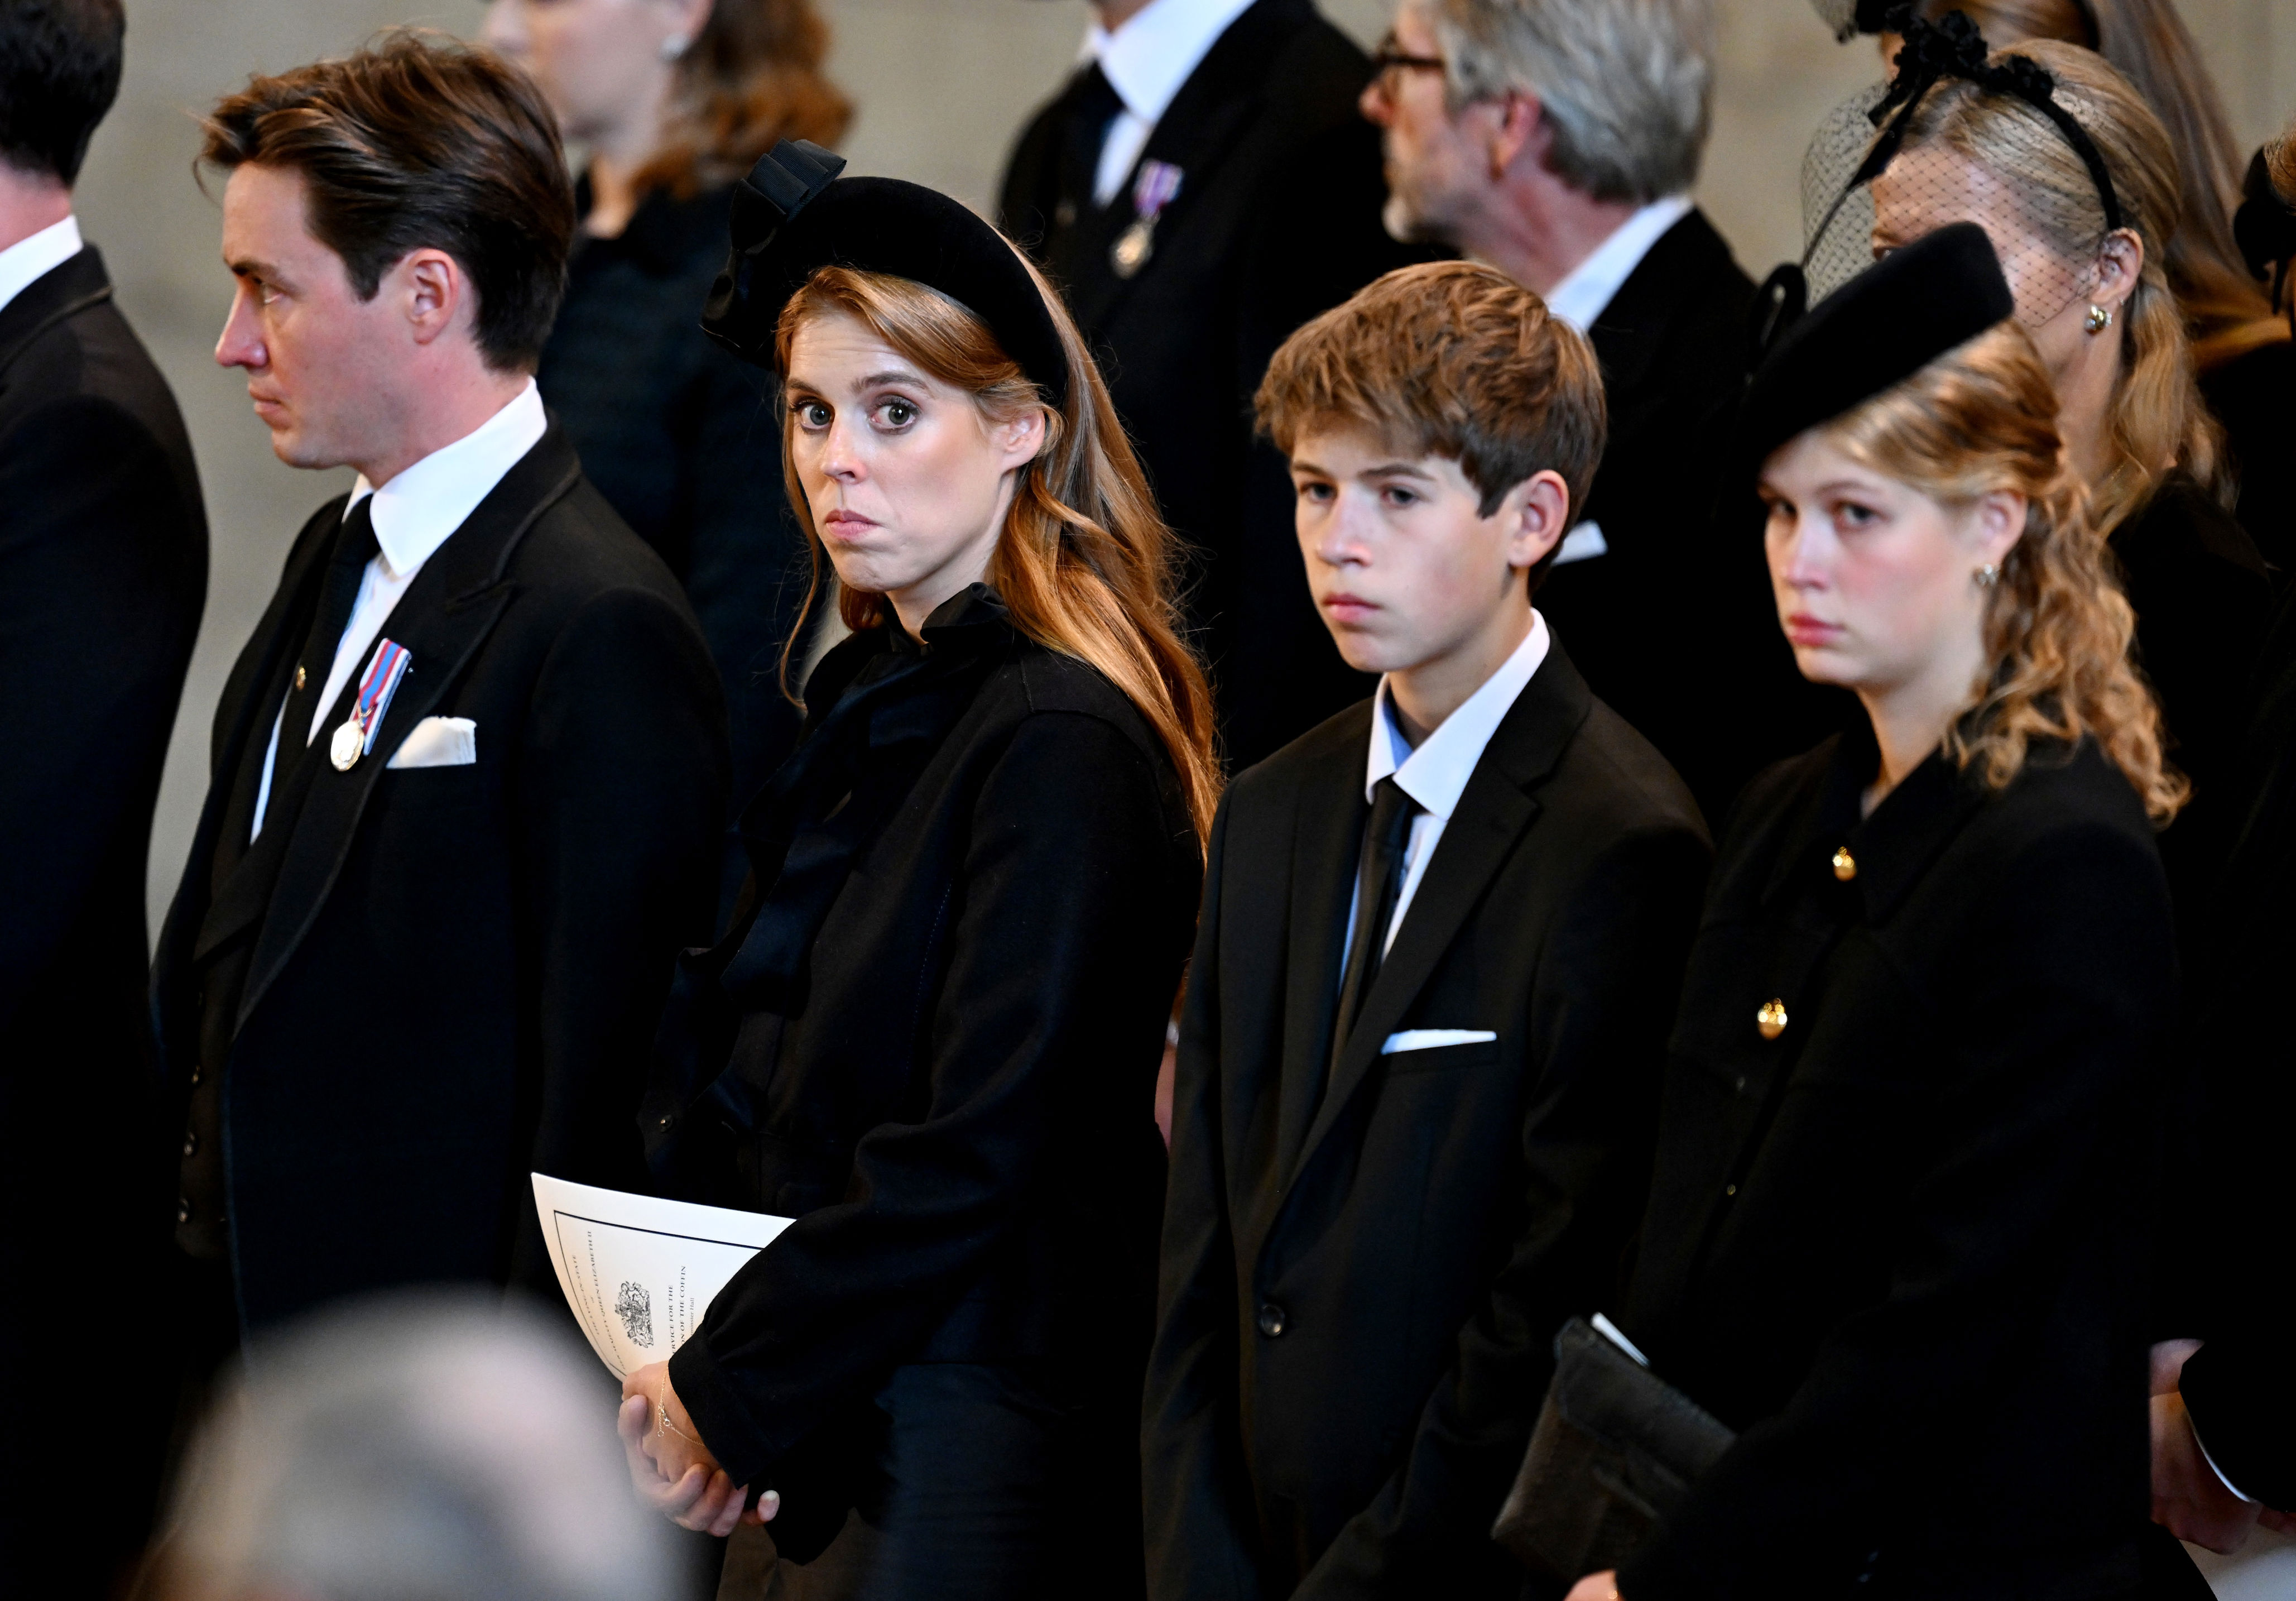 <p>Edoardo Mapelli Mozzi and wife Princess Beatrice stood next to her cousins James, Viscount Severn and Lady Louise Windsor, as they paid their respects in the Palace of Westminster in London on Sept. 14, 2022, after Queen Elizabeth II's coffin arrived from Buckingham Palace to begin her lying-in-state five days ahead of her funeral.</p>